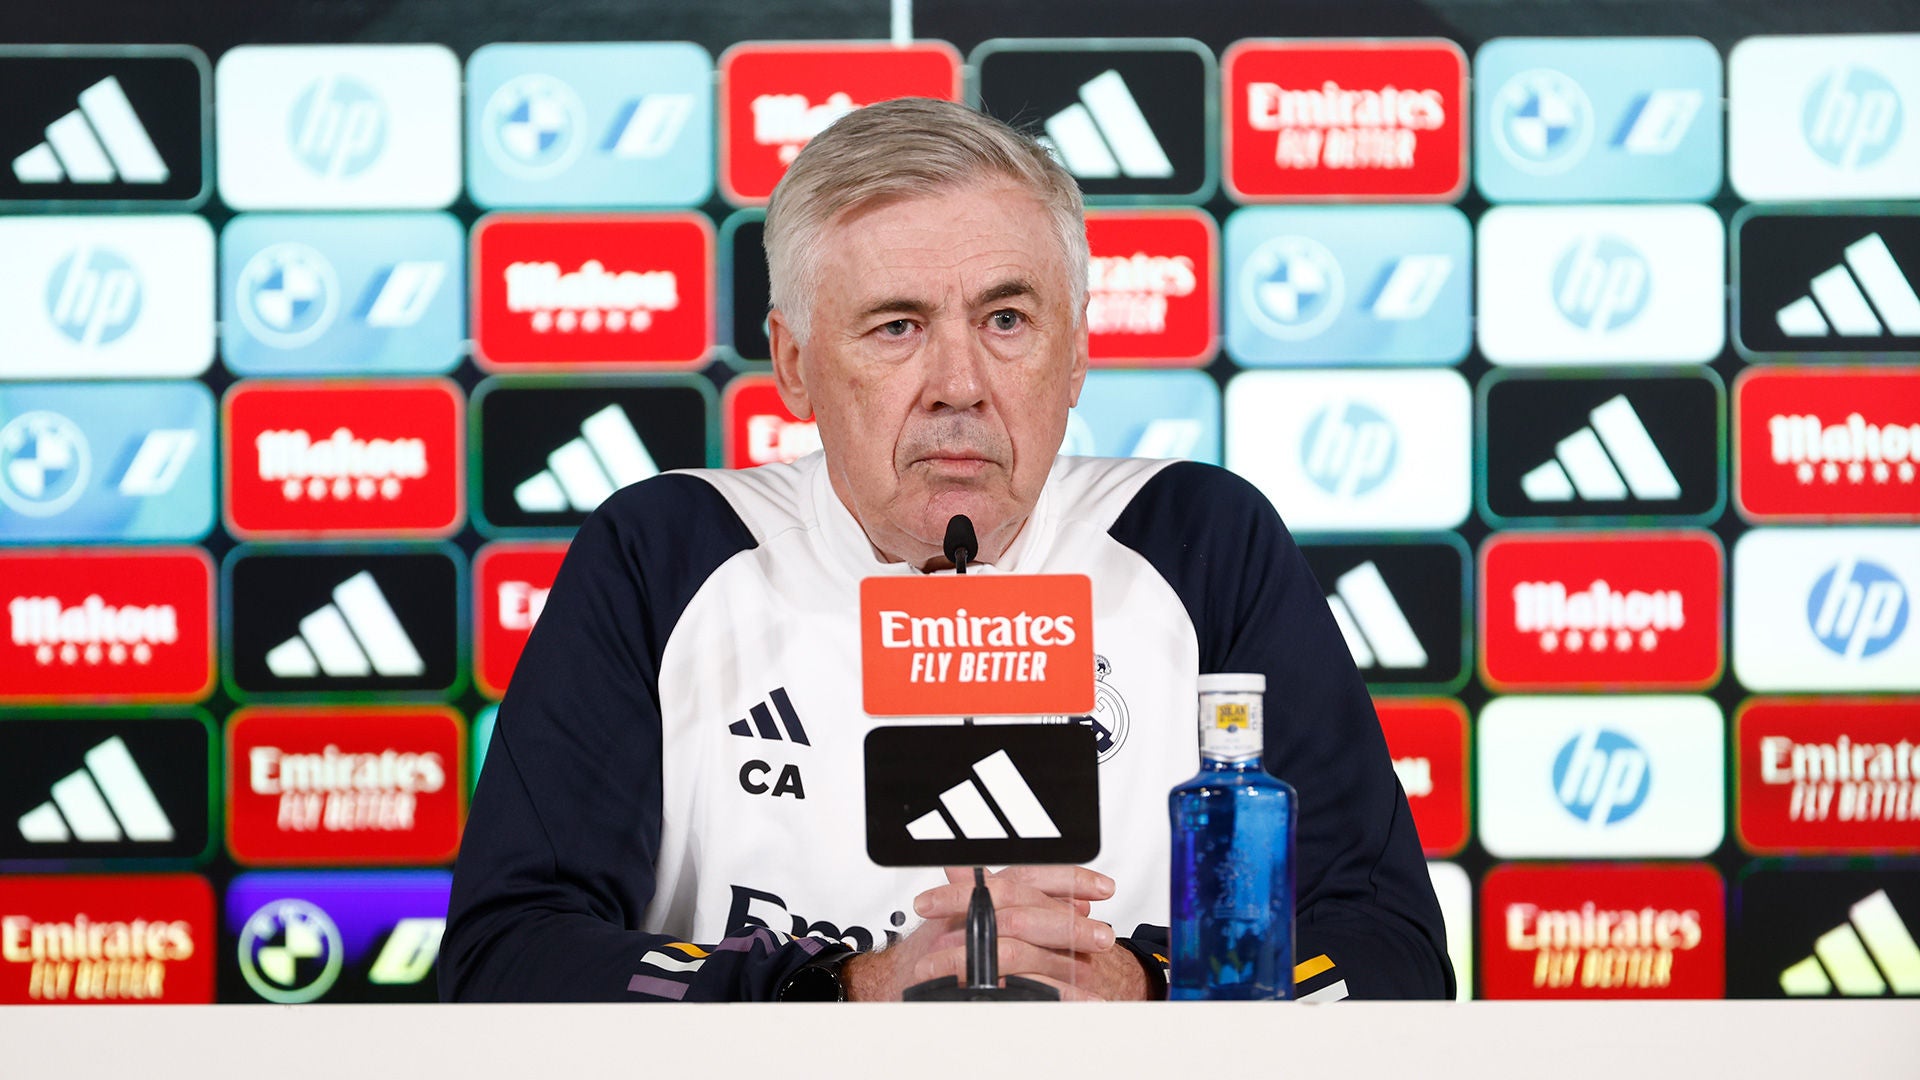 Ancelotti: "We have to show intensity and a good attitude"